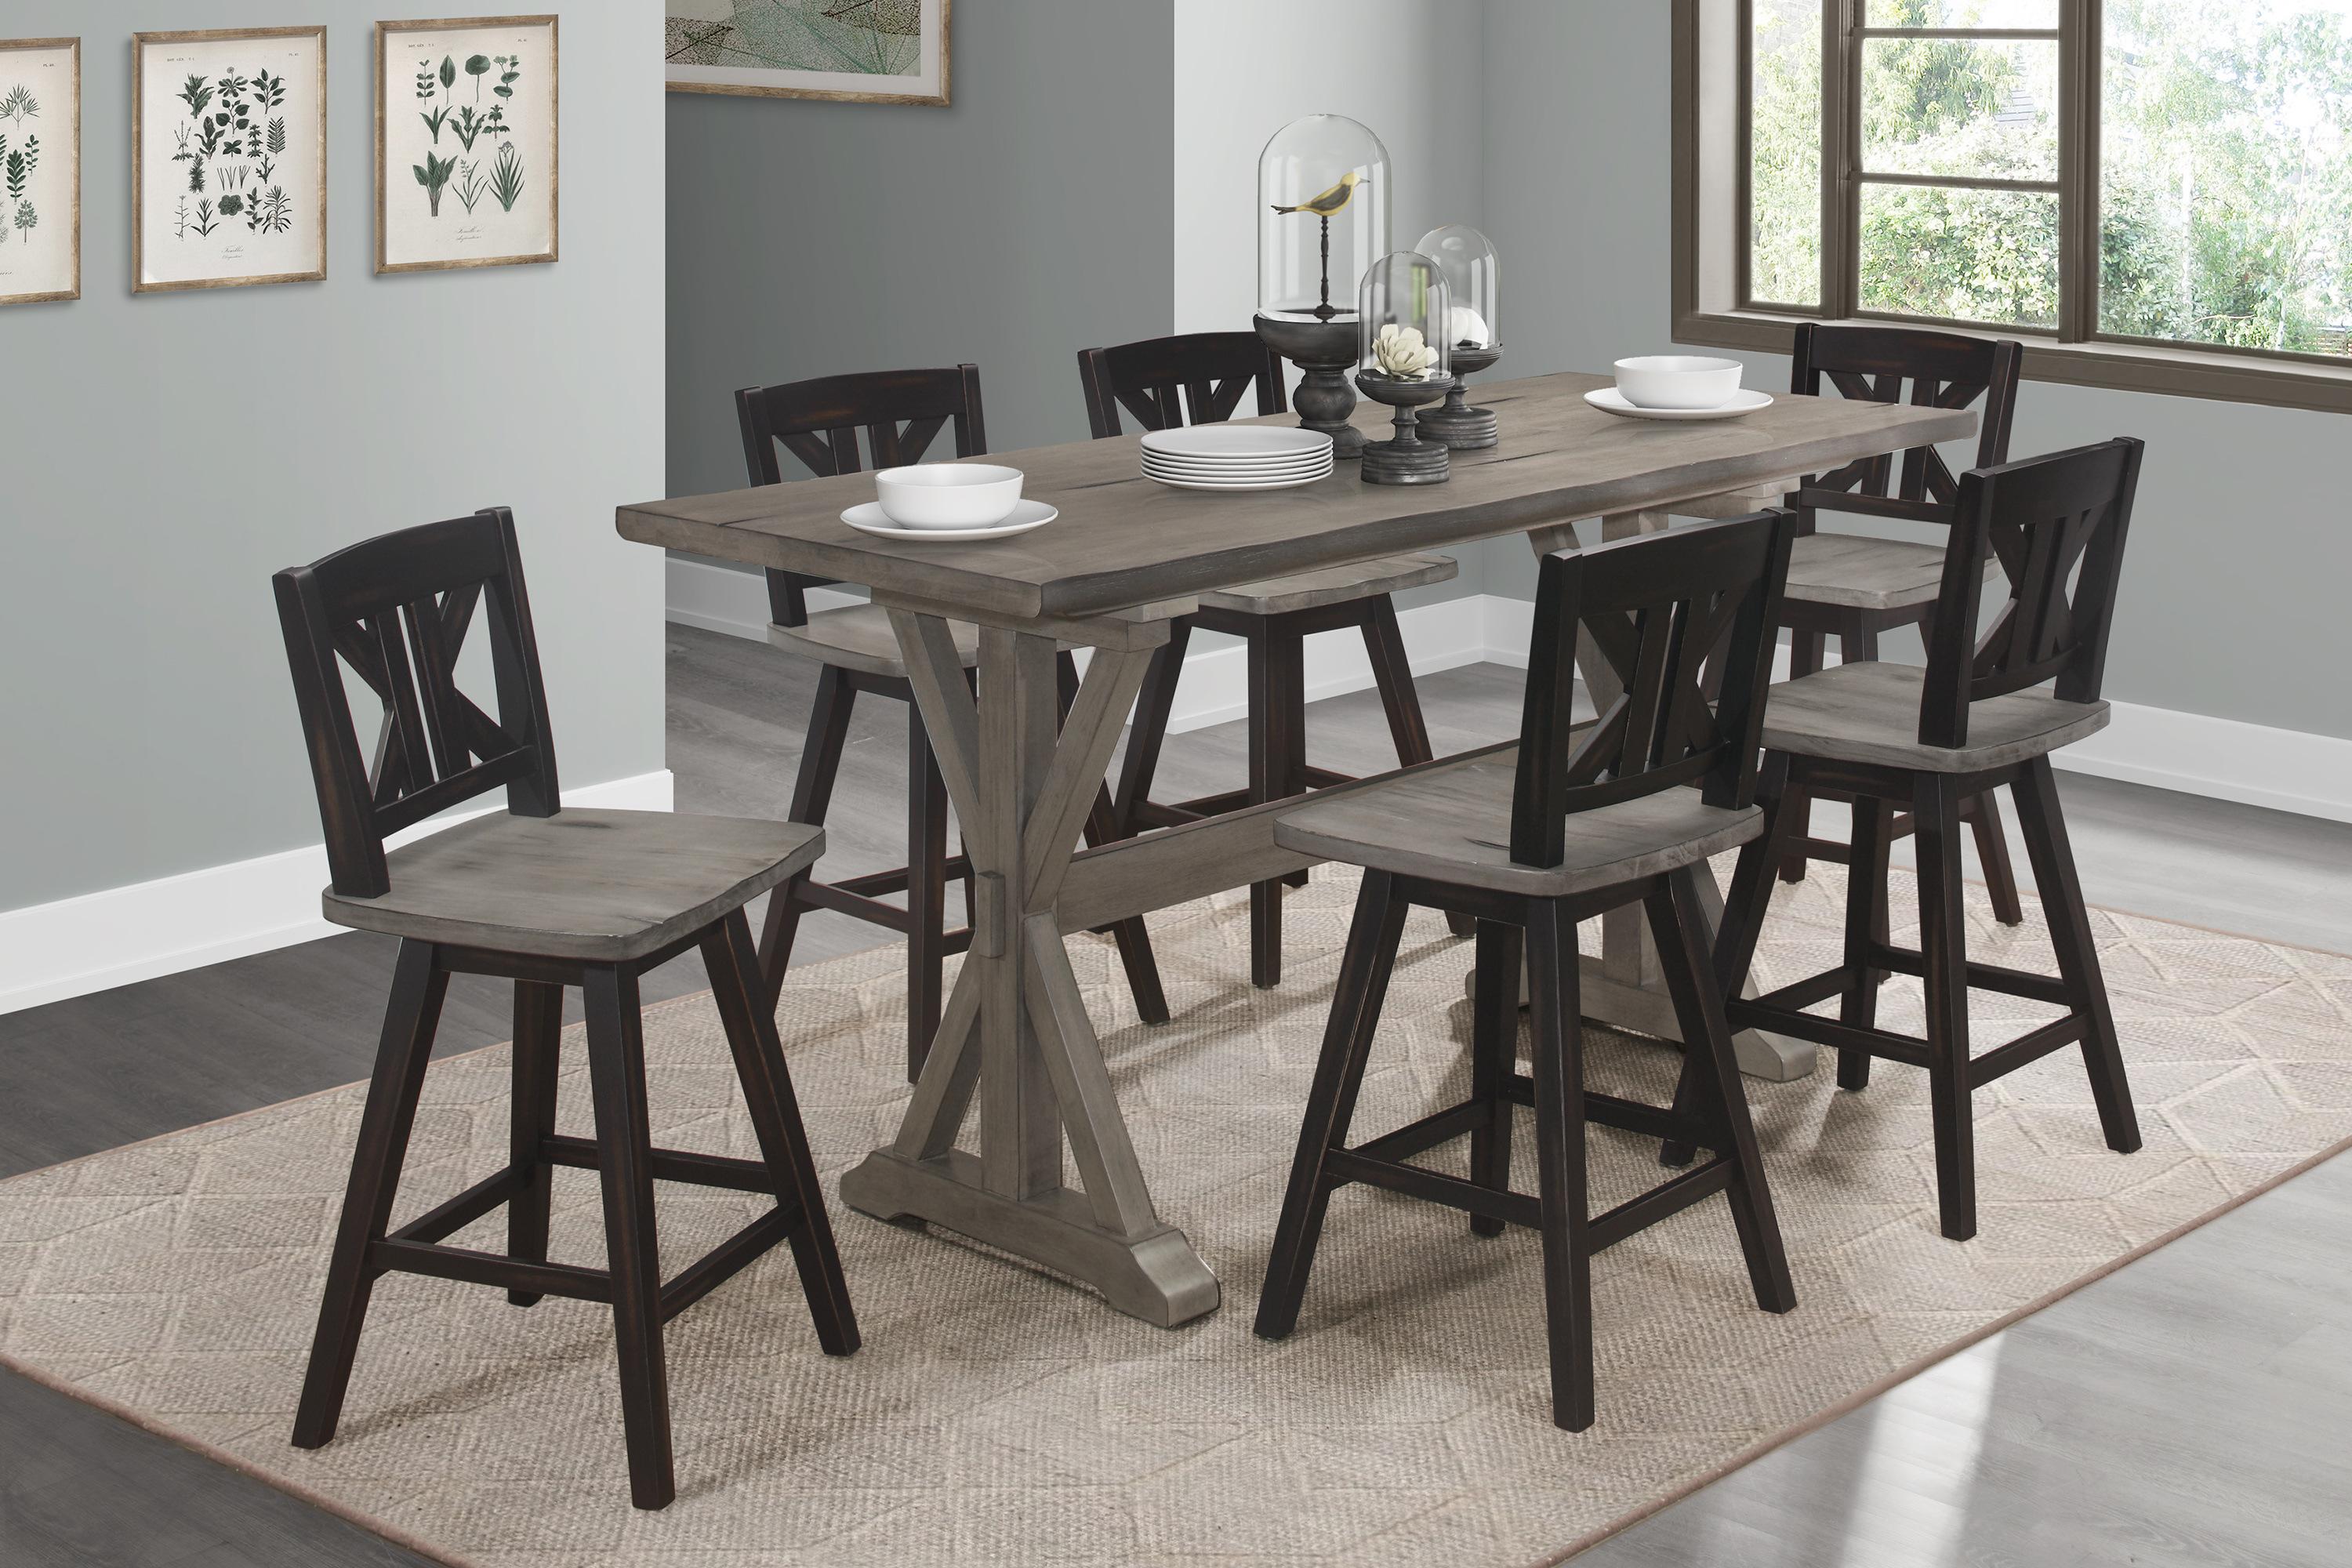 

    
5602-36 Rustic Distressed Gray Solid Wood Counter Height Table Homelegance 5602-36 Amsonia
